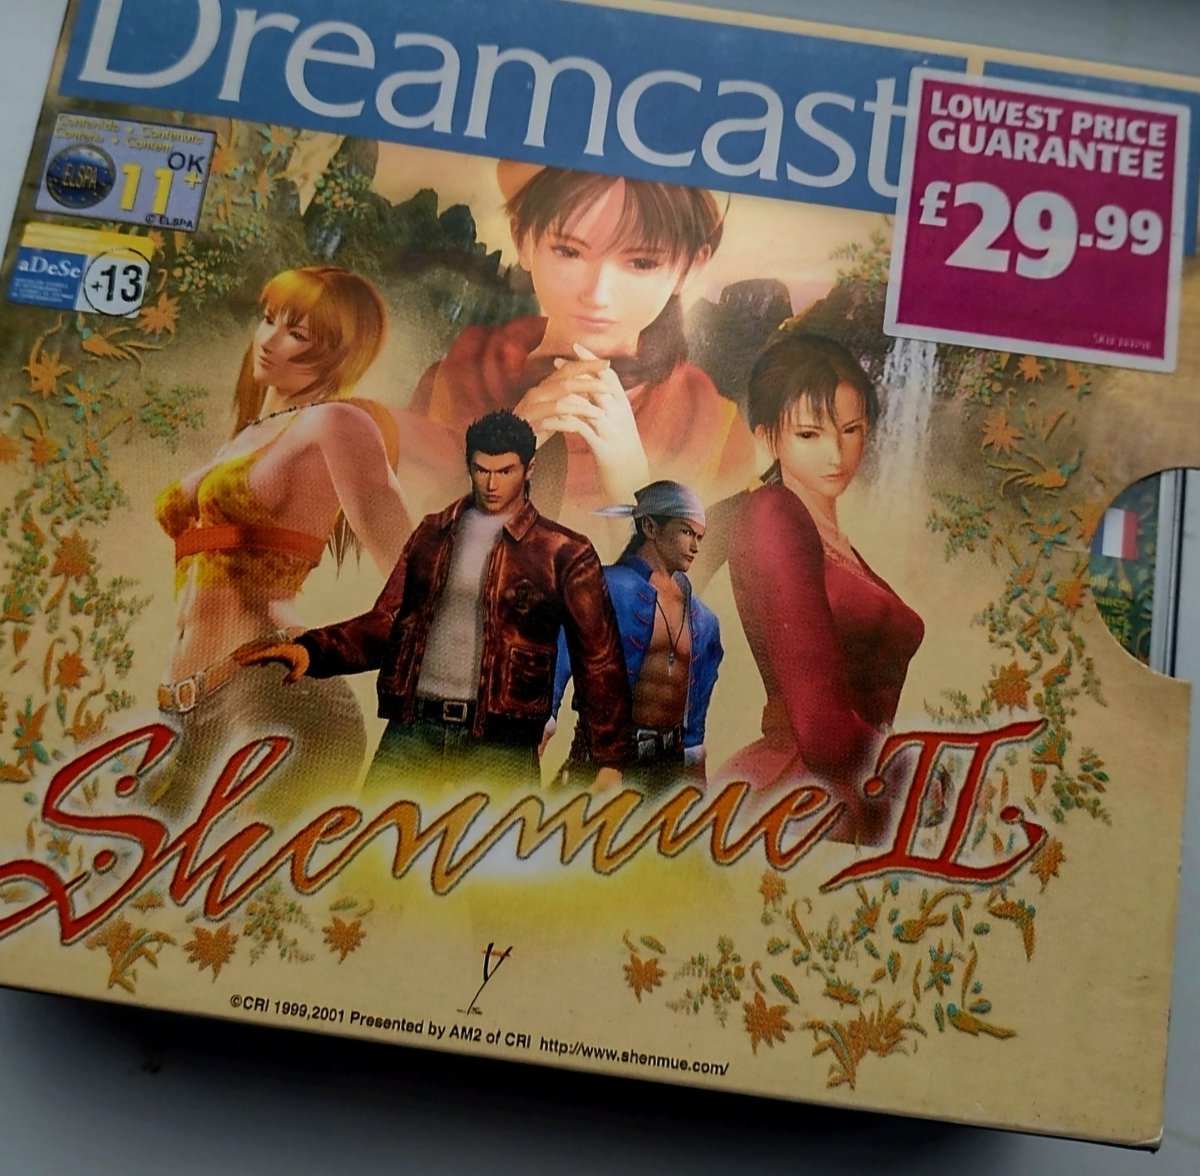 Any love for Shenmue II?